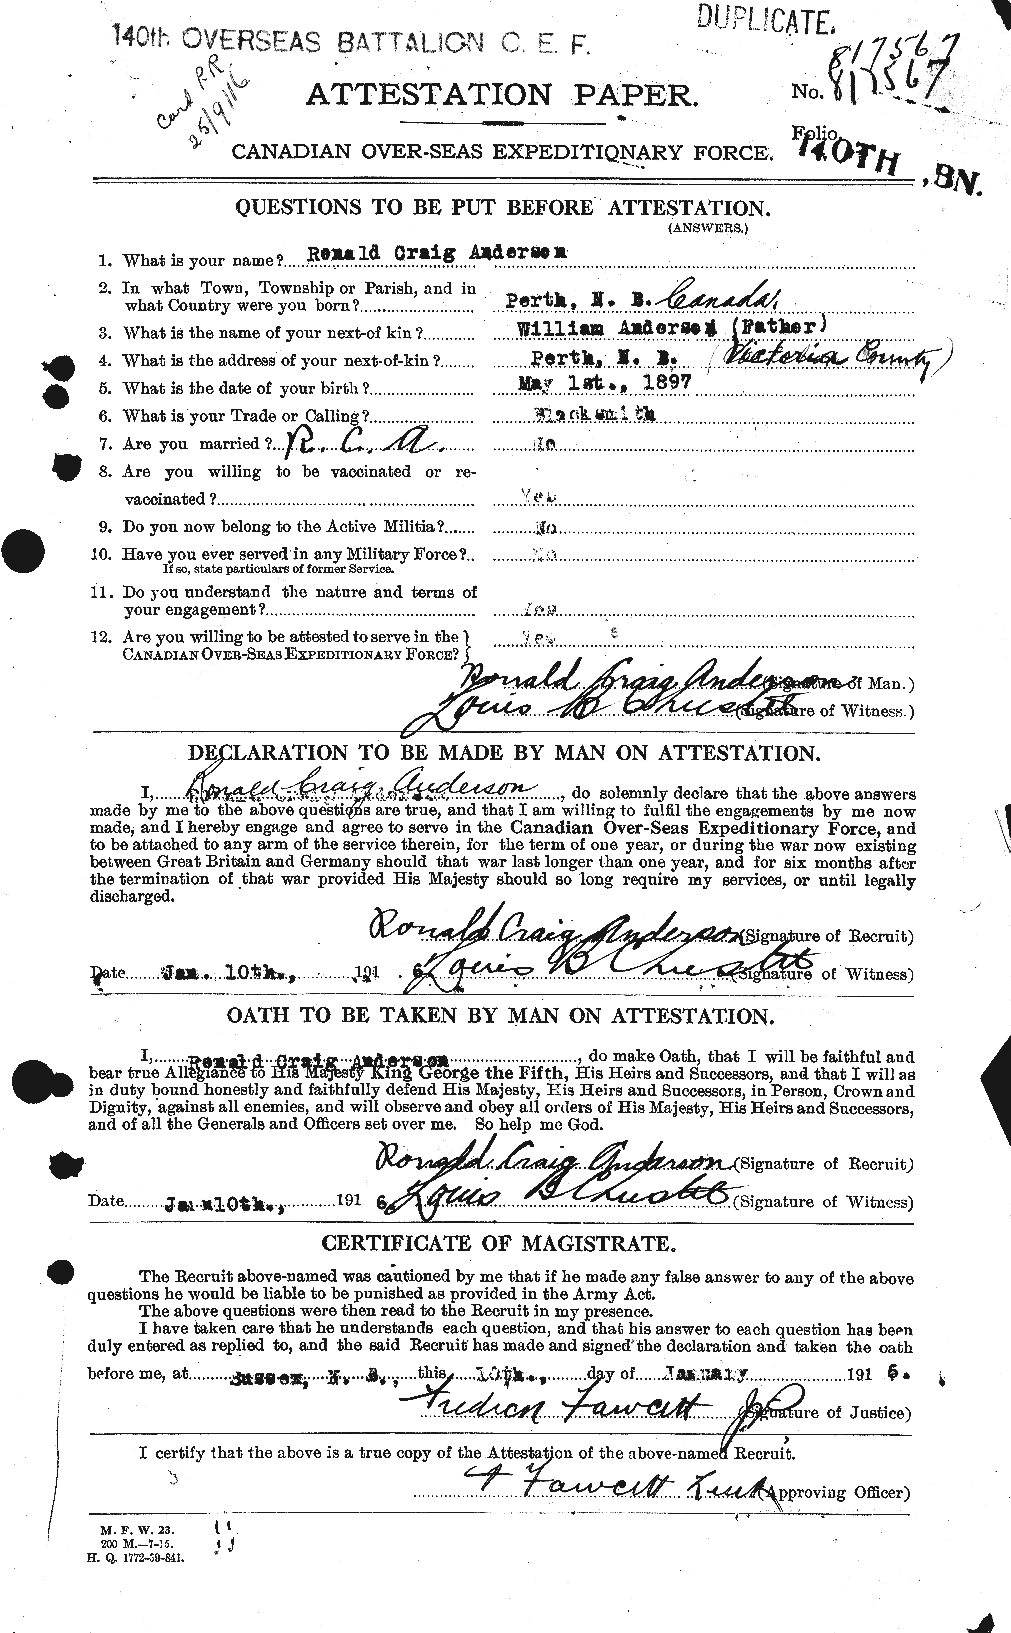 Personnel Records of the First World War - CEF 207210a